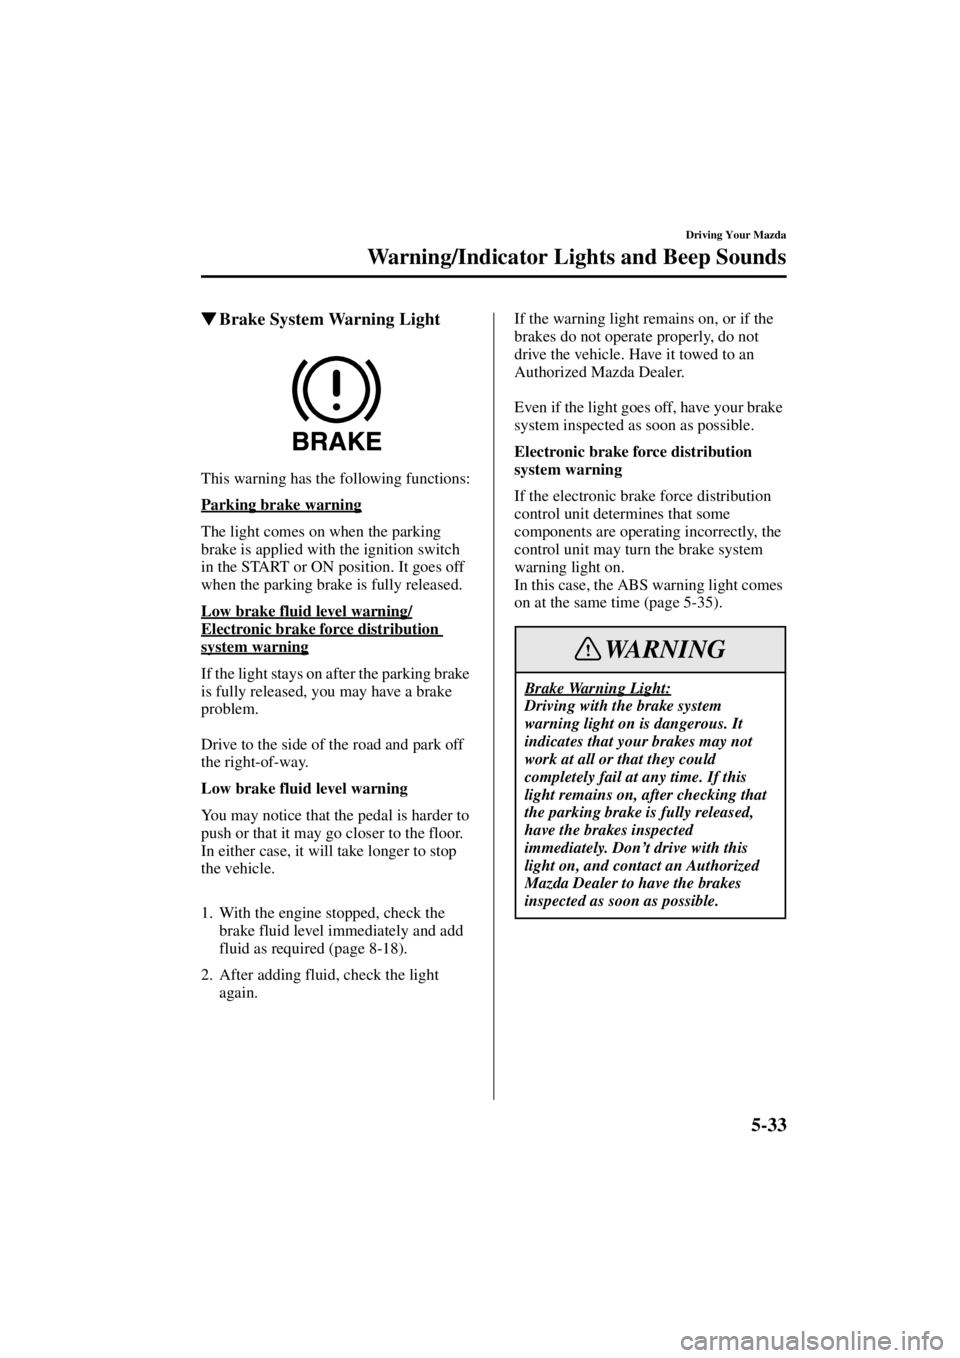 MAZDA MODEL 3 4-DOOR 2004 User Guide 5-33
Driving Your Mazda
Warning/Indicator Lights and Beep Sounds
Form No. 8S18-EA-03I
Brake System Warning Light
This warning has the following functions:
Parking brake warning
The light comes on whe